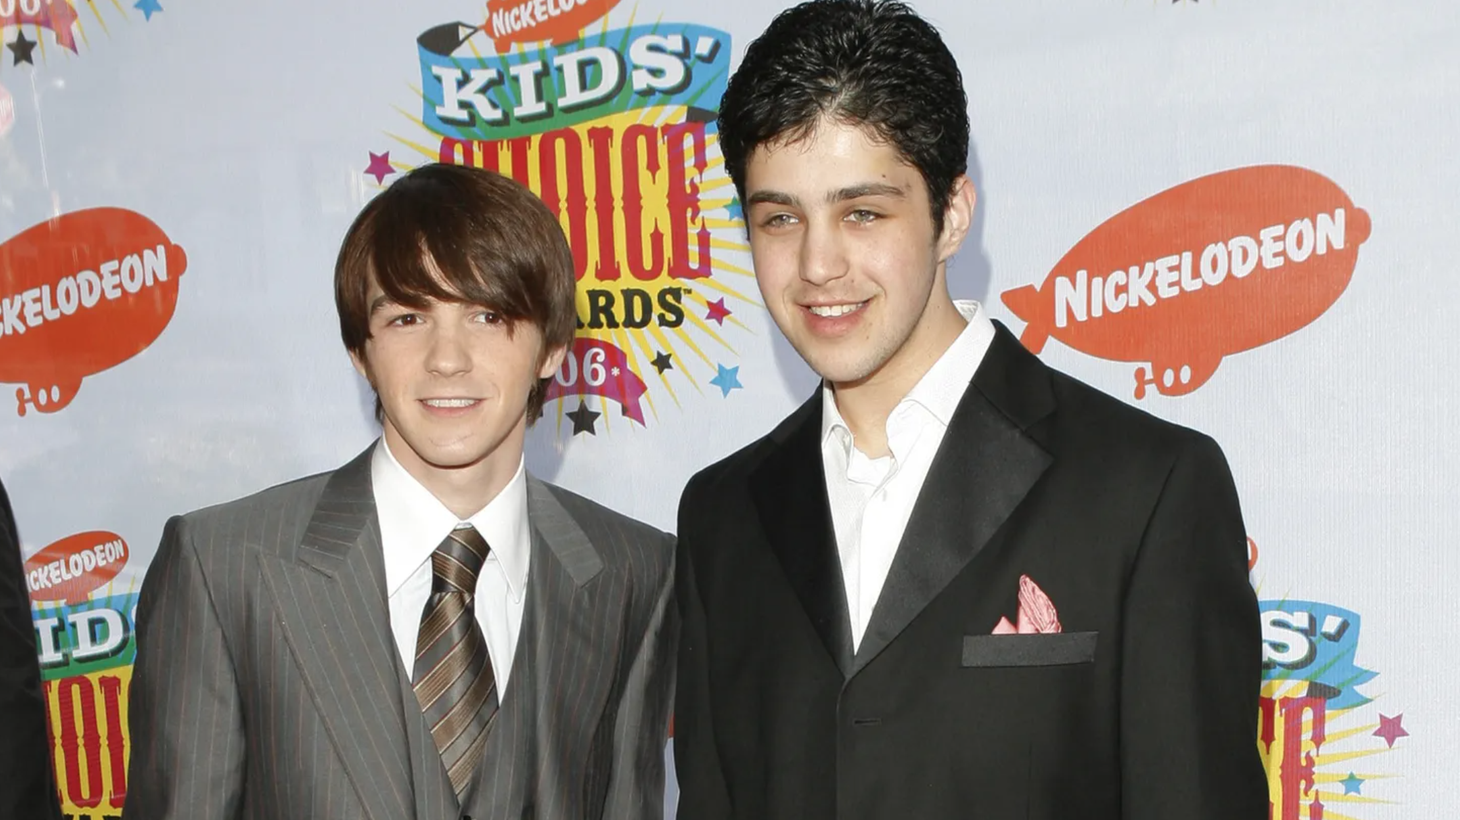 Drake Bell, pictured here with “Drake and Josh” co-star Josh Peck at the Nickelodeon Kid’s Choice Awards in 2006, speaks out about alleged years of abuse on set in the new docuseries “Quiet on Set: The Dark Side of Kids TV.”